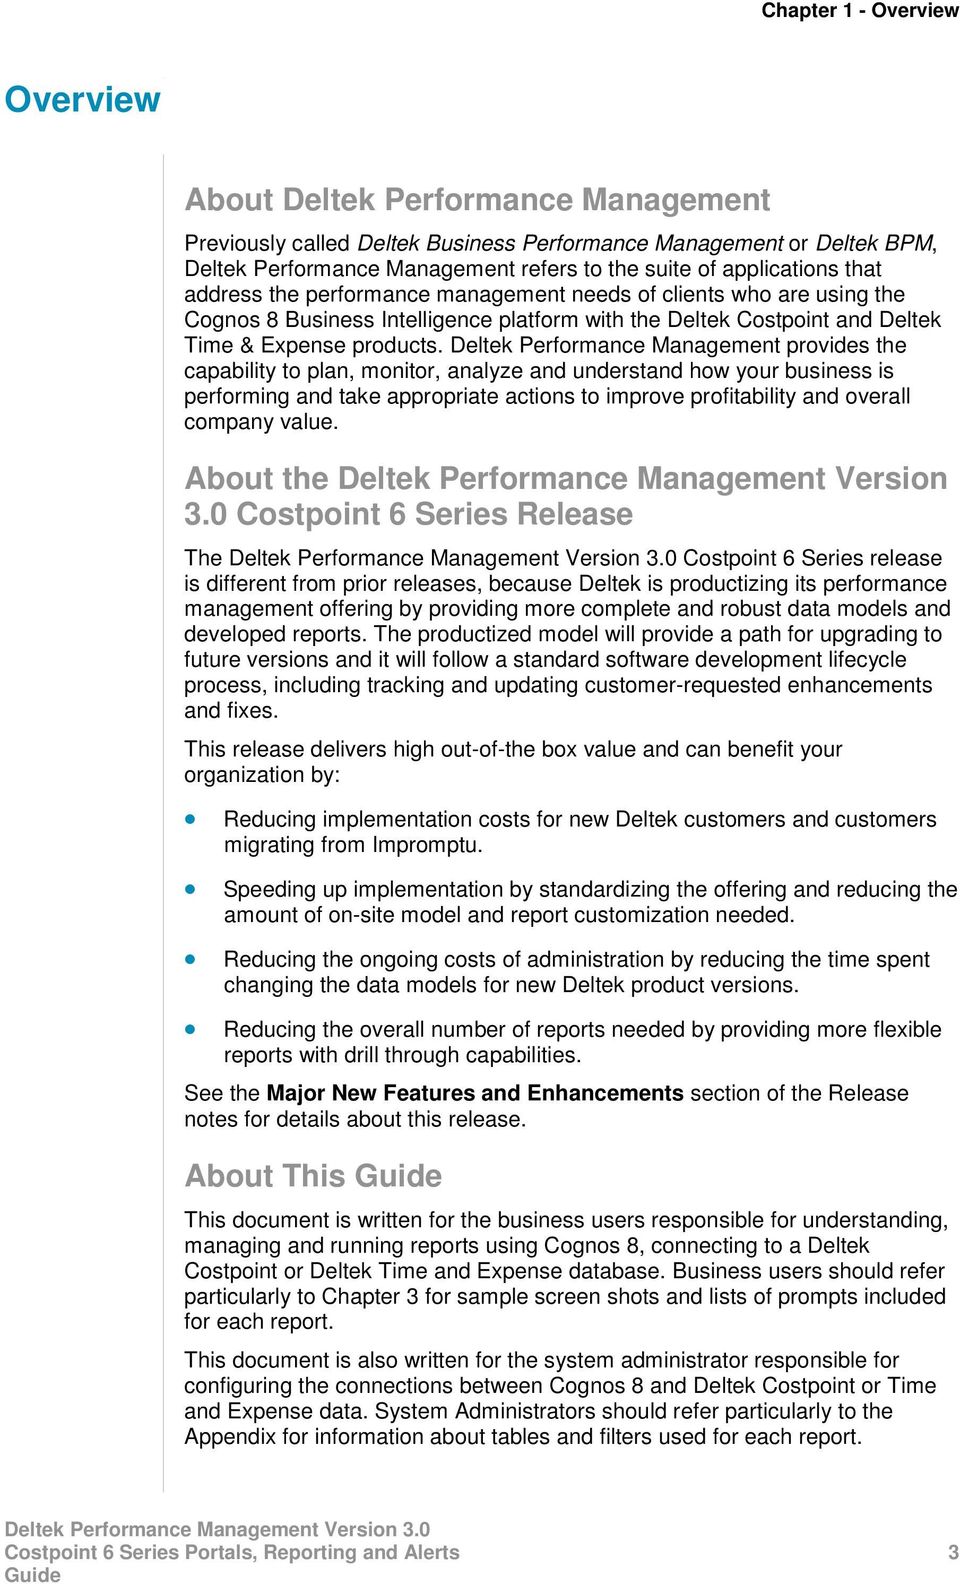 Deltek Performance Management provides the capability to plan, monitor, analyze and understand how your business is performing and take appropriate actions to improve profitability and overall